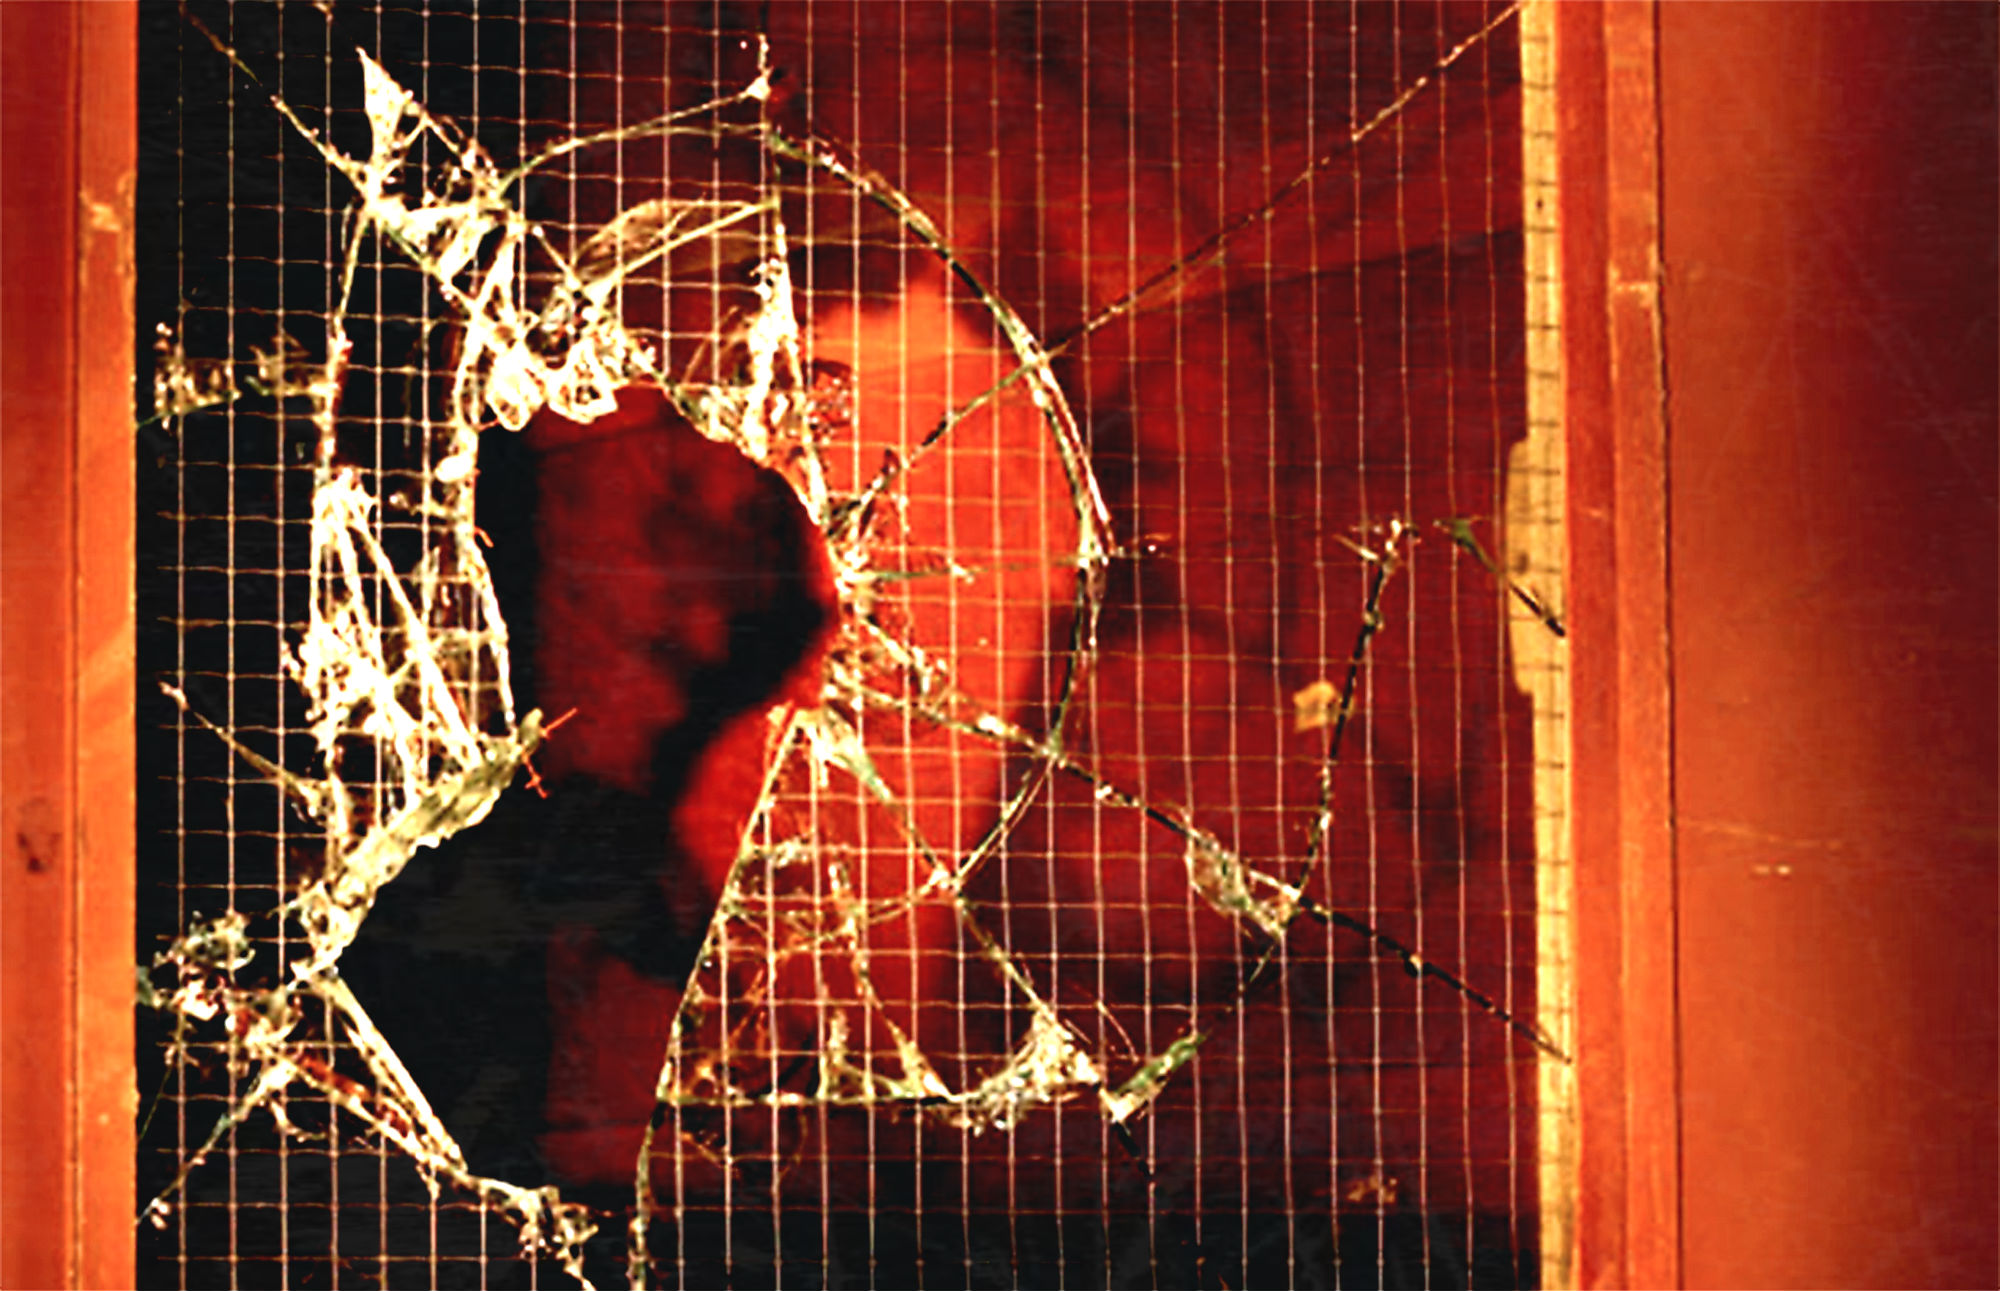 A smashed window at a crime scene